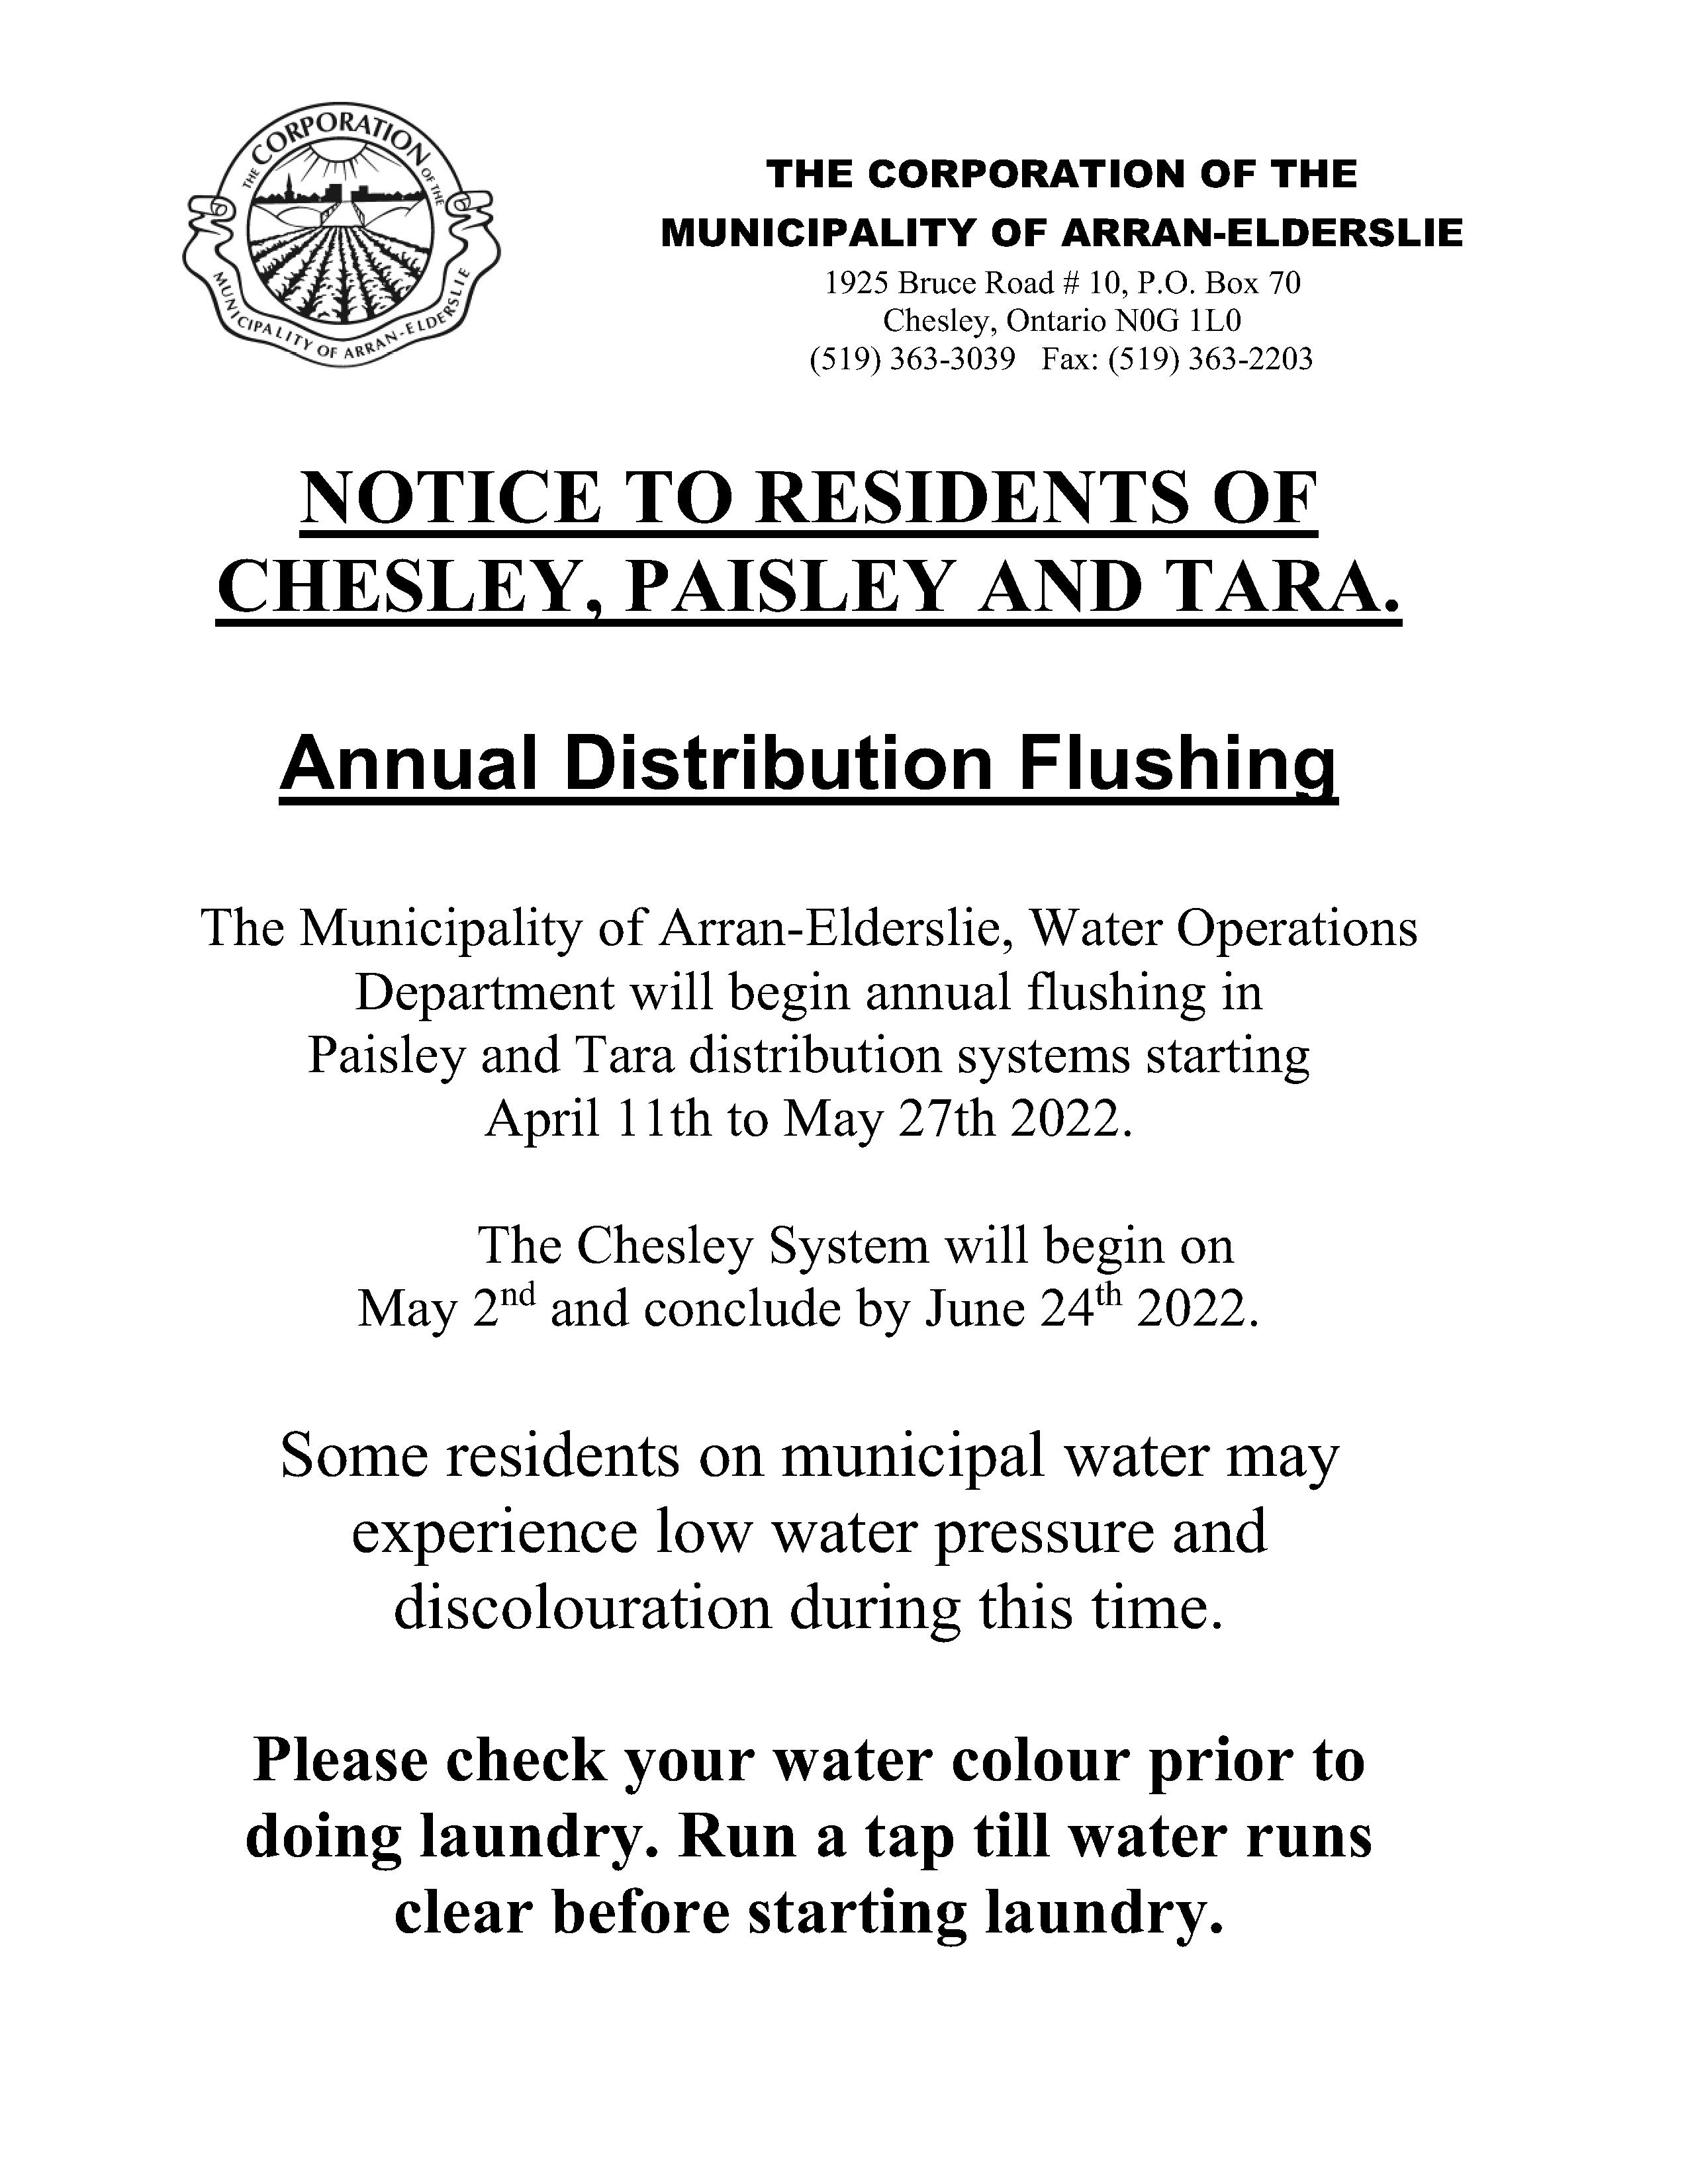 Annual Distribution Flushing Notice